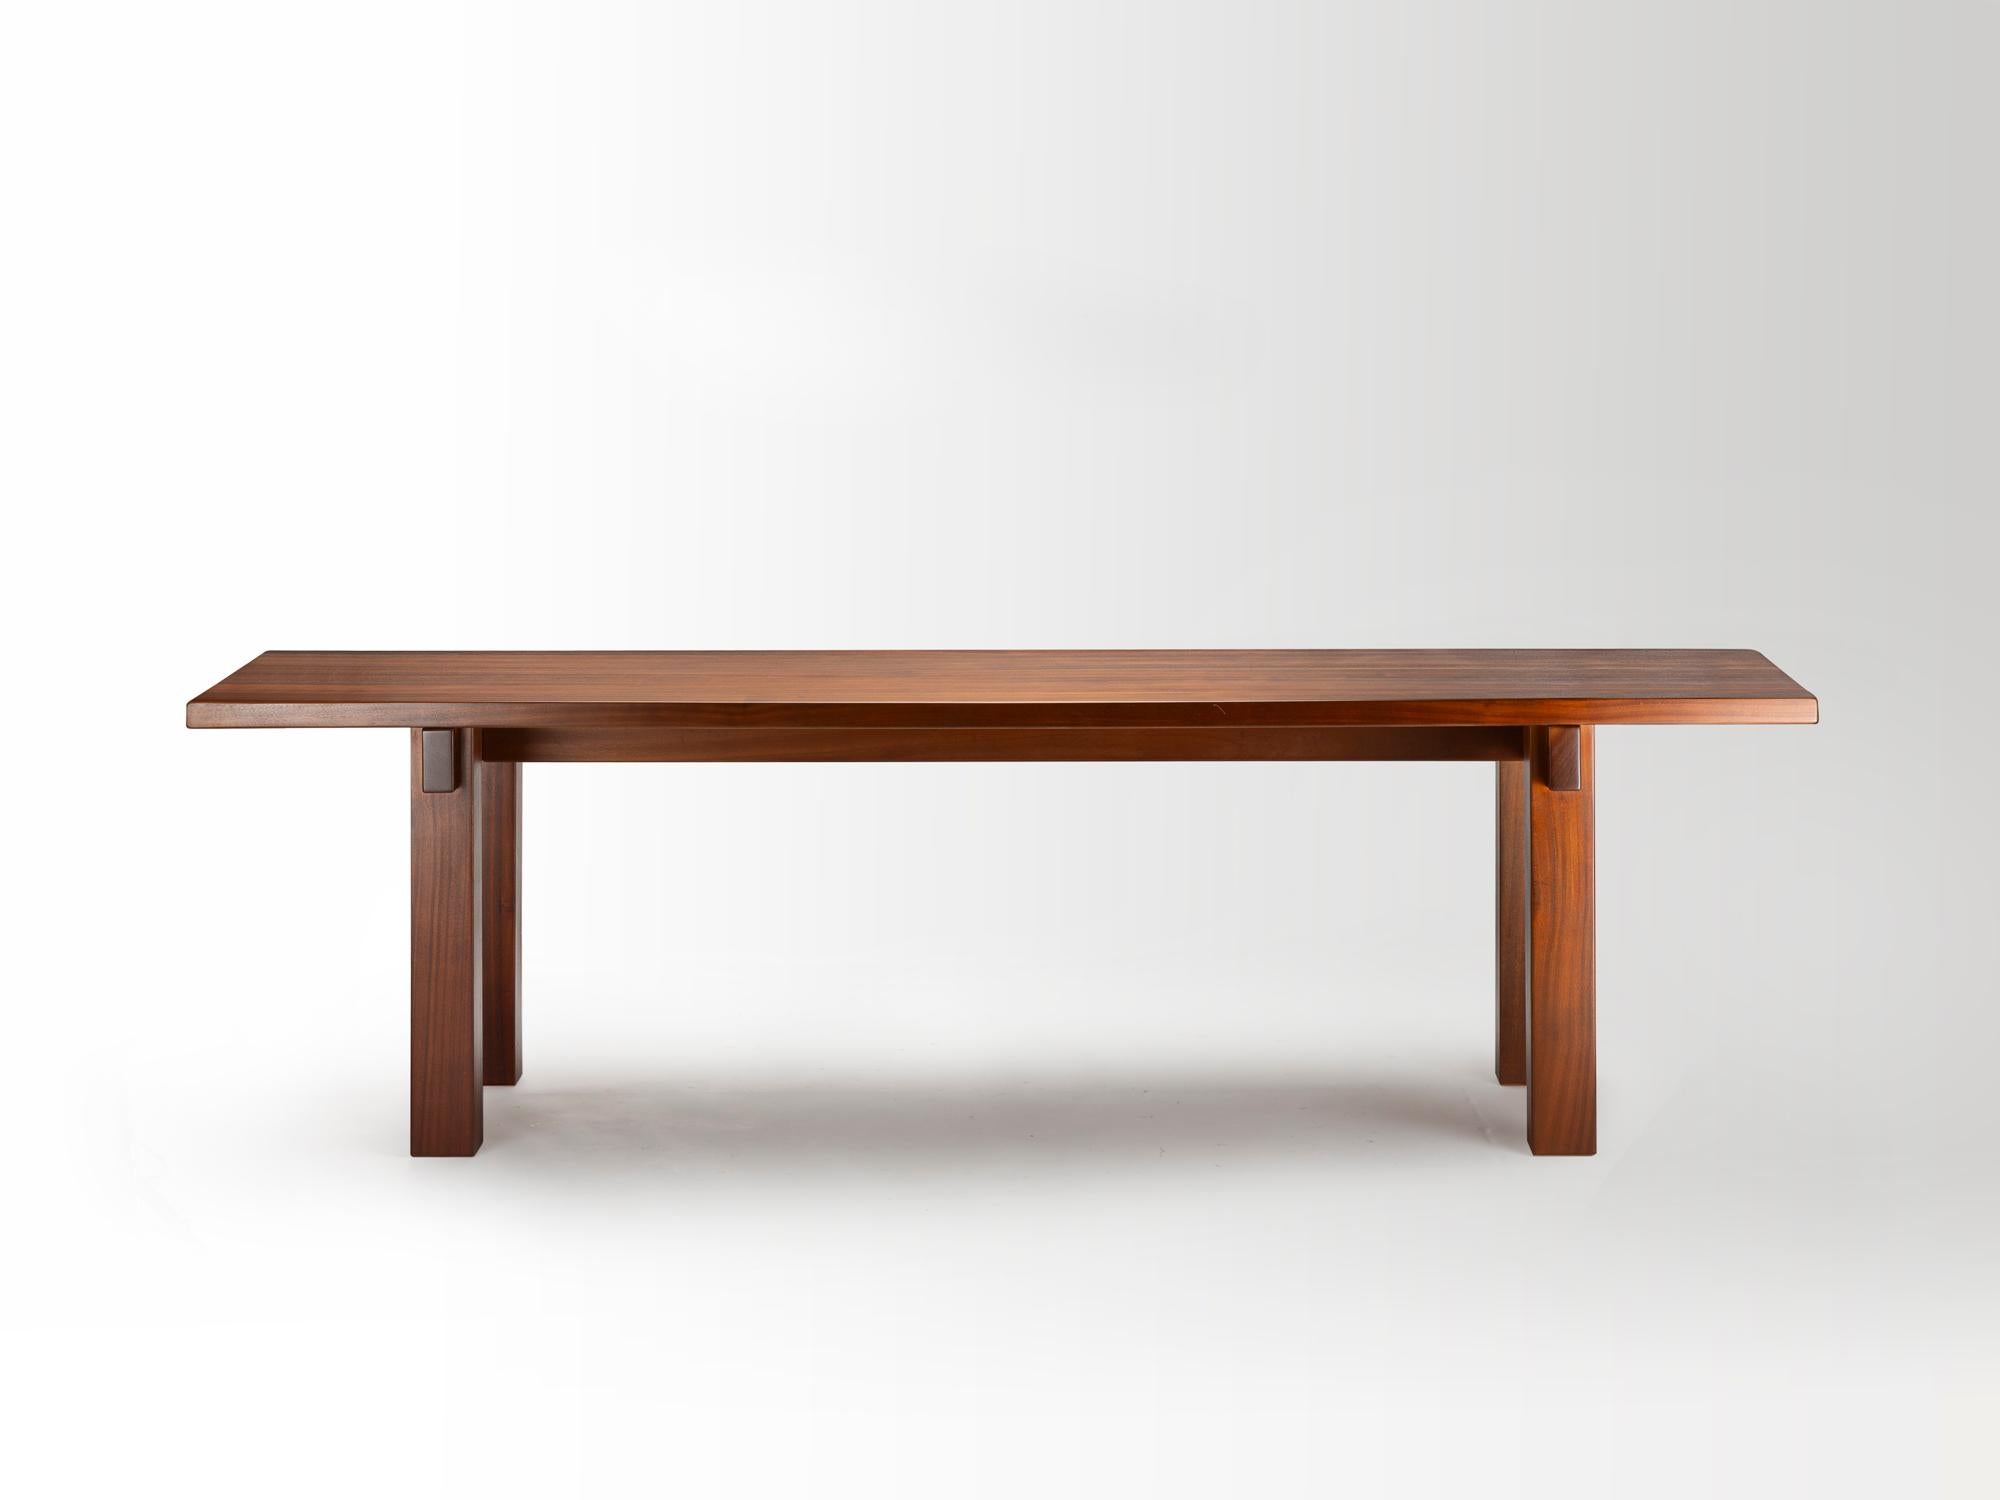 Rare Brazil Table by Charlotte Perriand, edited in 1970 by sentou in solid mahogany.
Very radical design for this collectible piece.